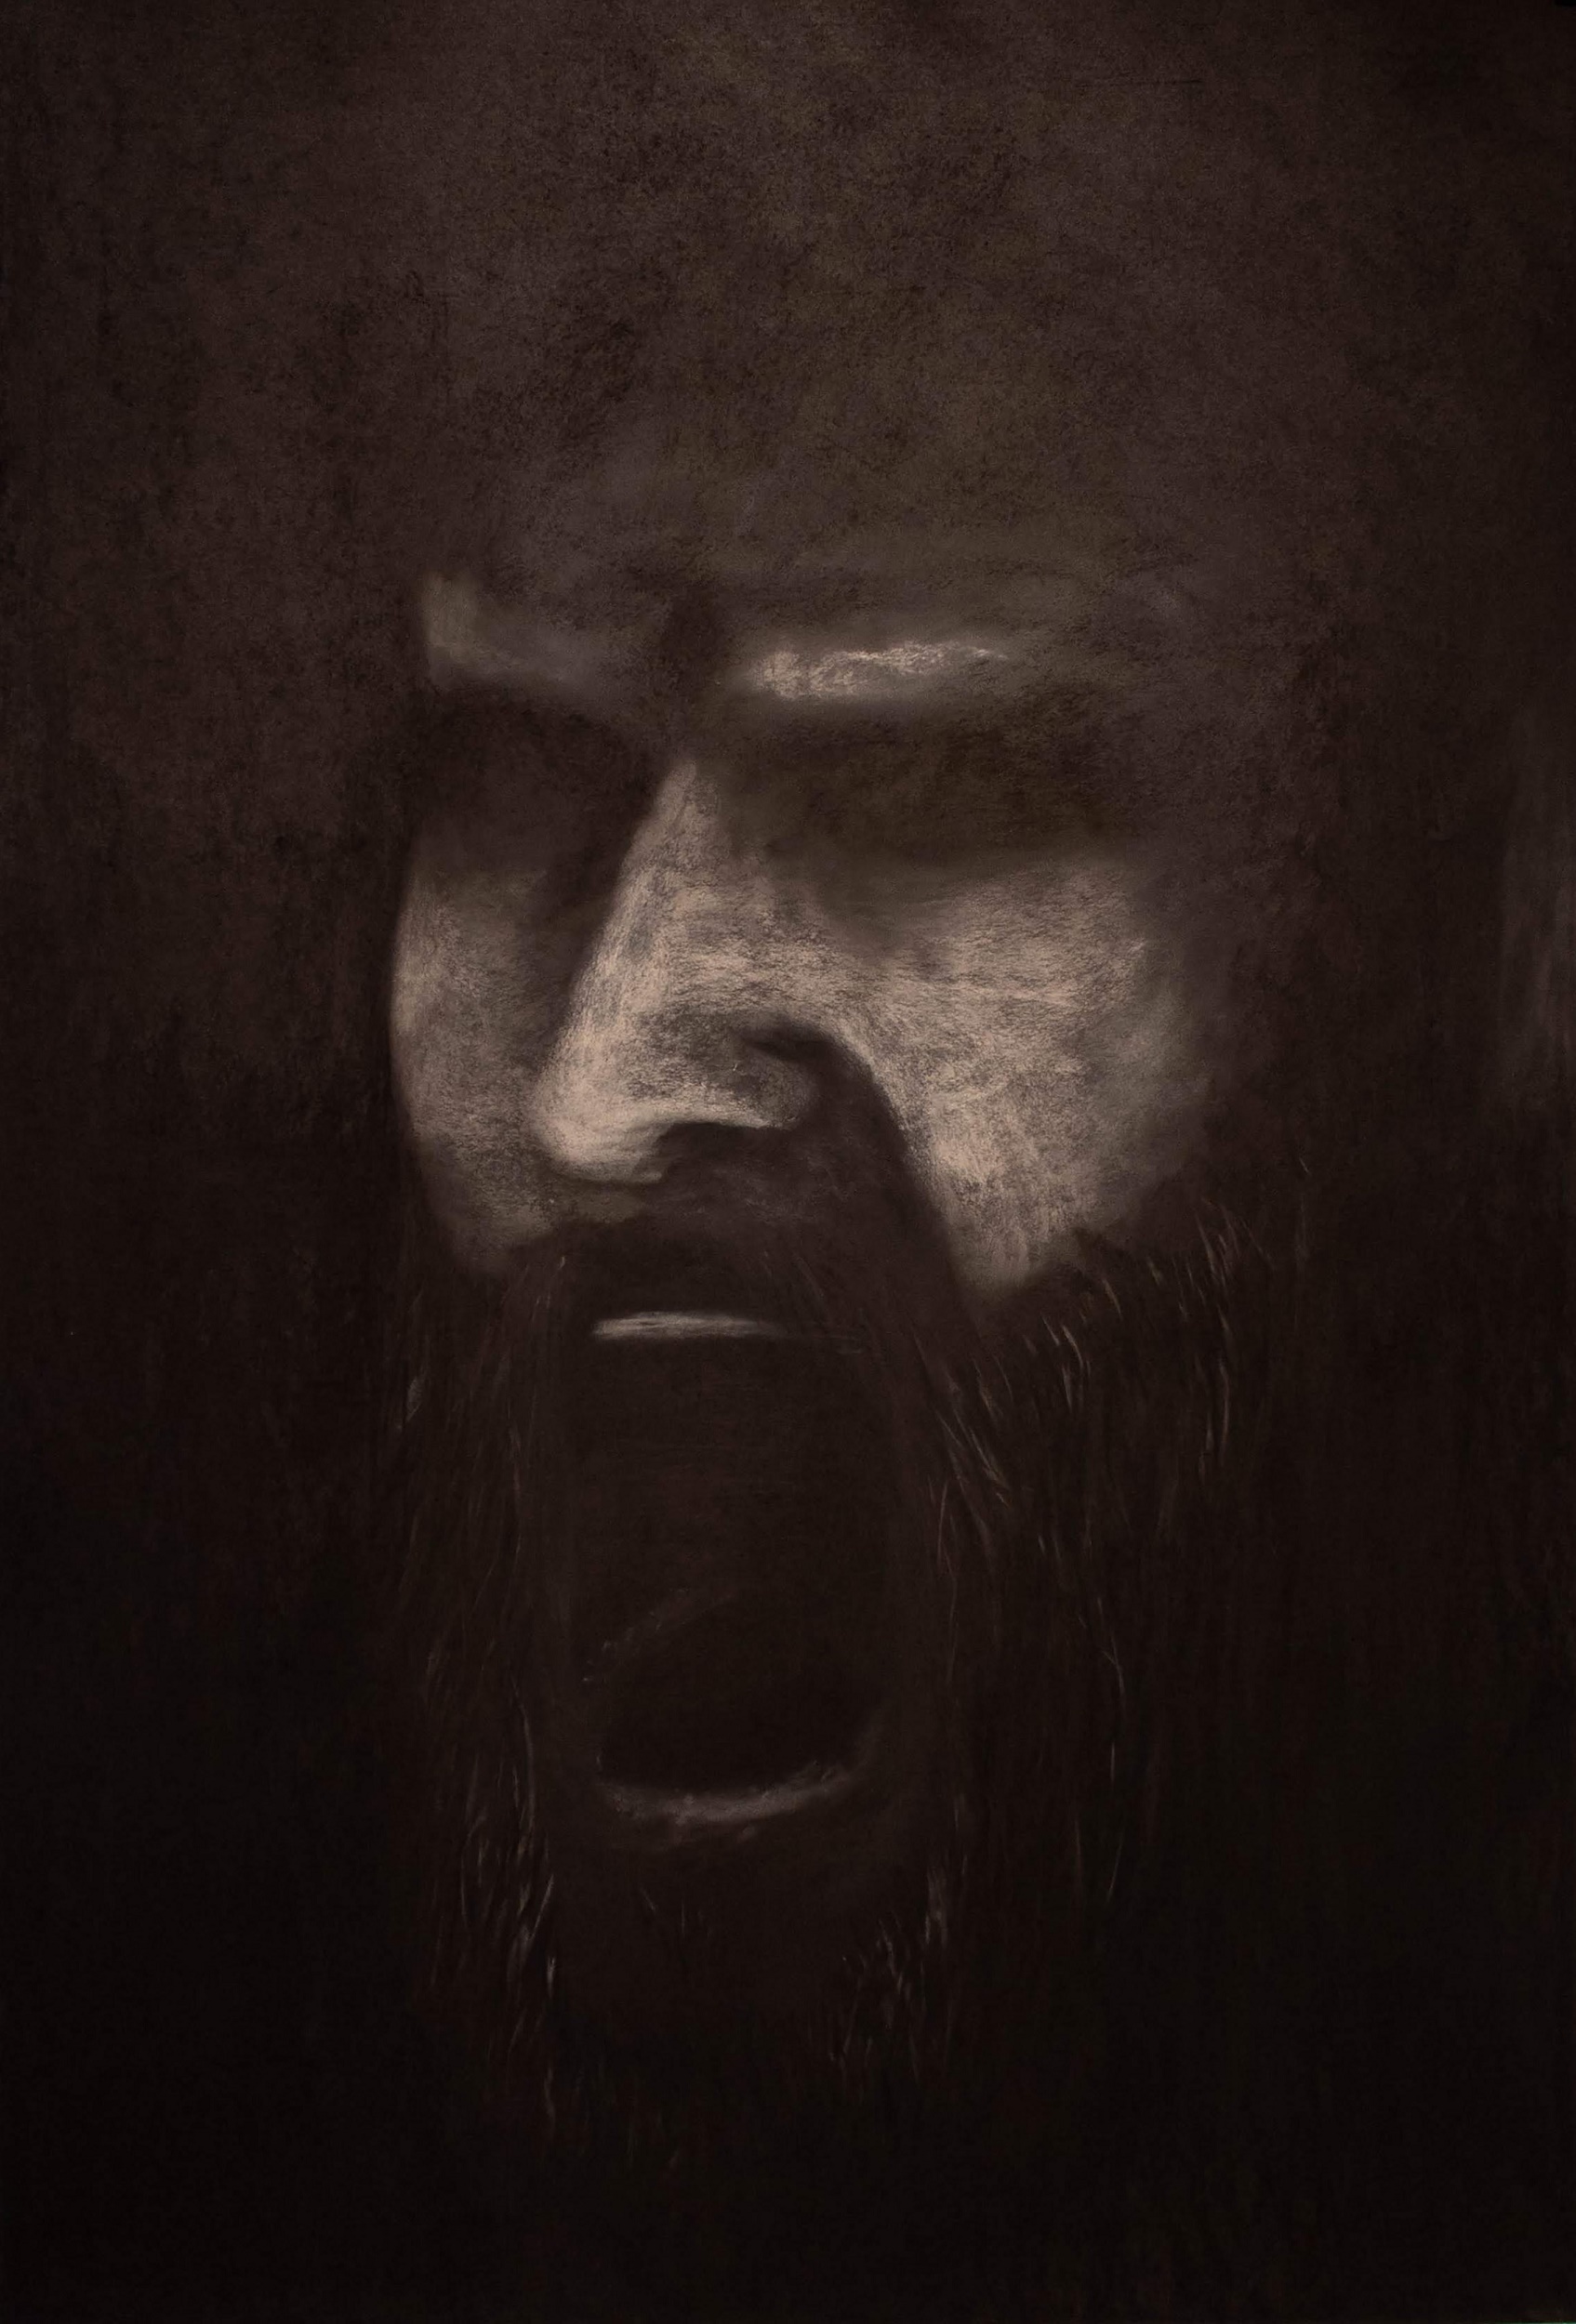 A charcoal drawing of a man with an open mouth as if he is yelling